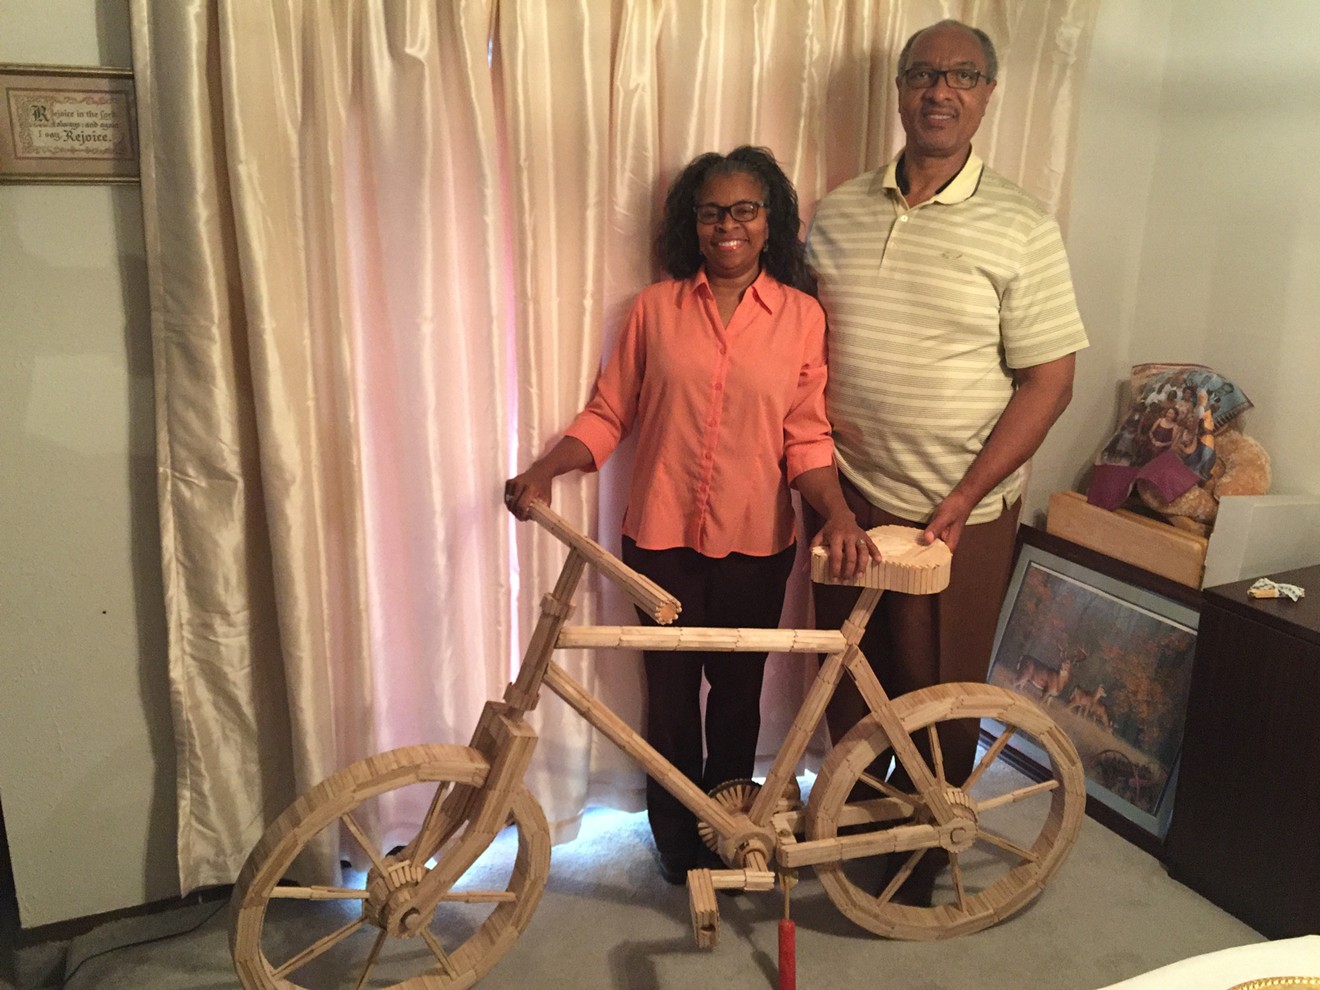 Melinda and Larry Gardner of Carrollton received a bicycle made out of popsicle sticks from talk show host Jimmy Kimmel.